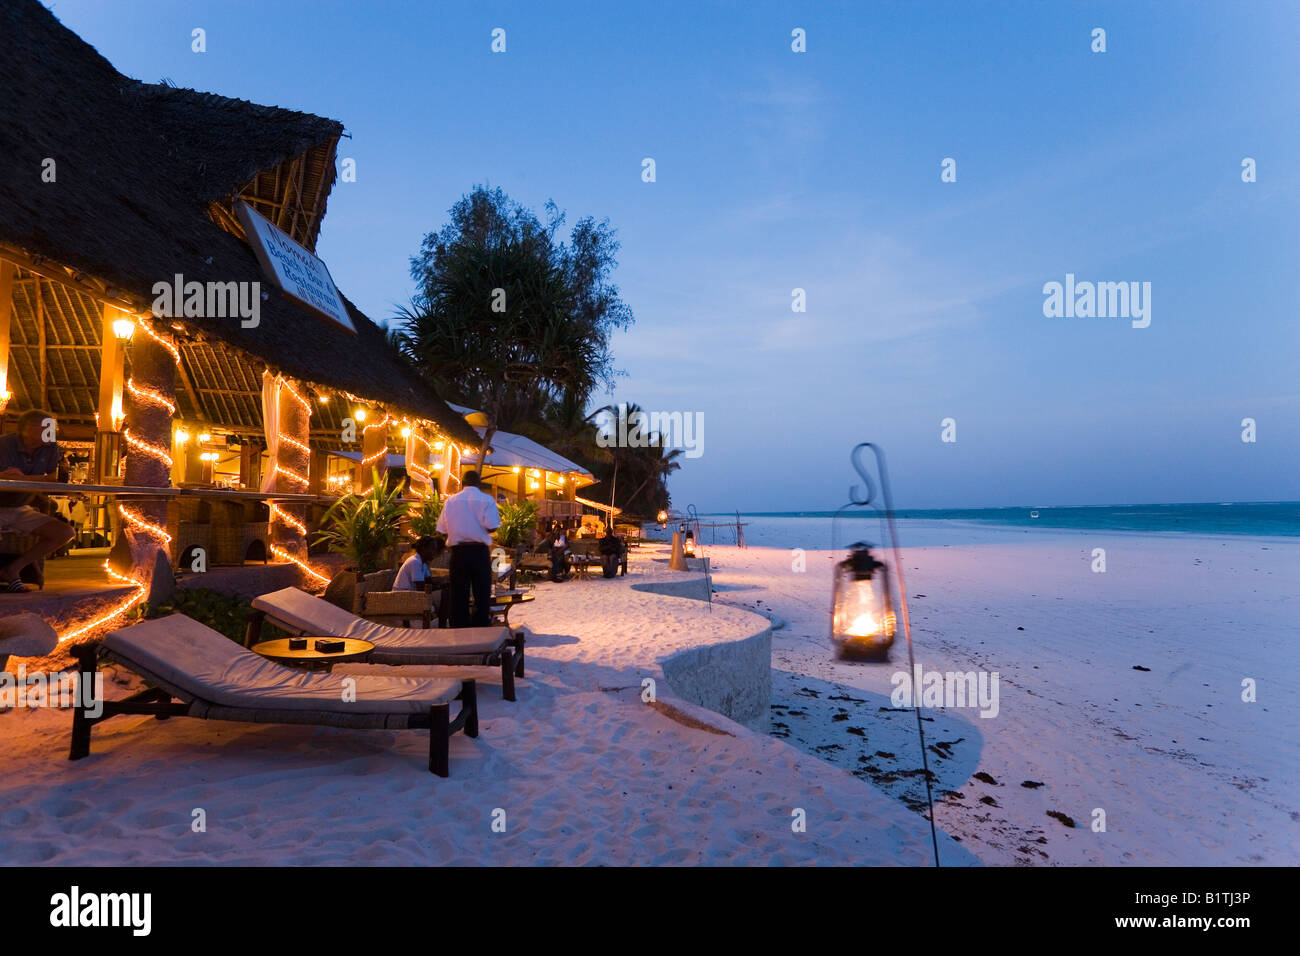 Sunlougers and beach bar in the evening The Sands at Nomad Diani Beach Kenya Stock Photo